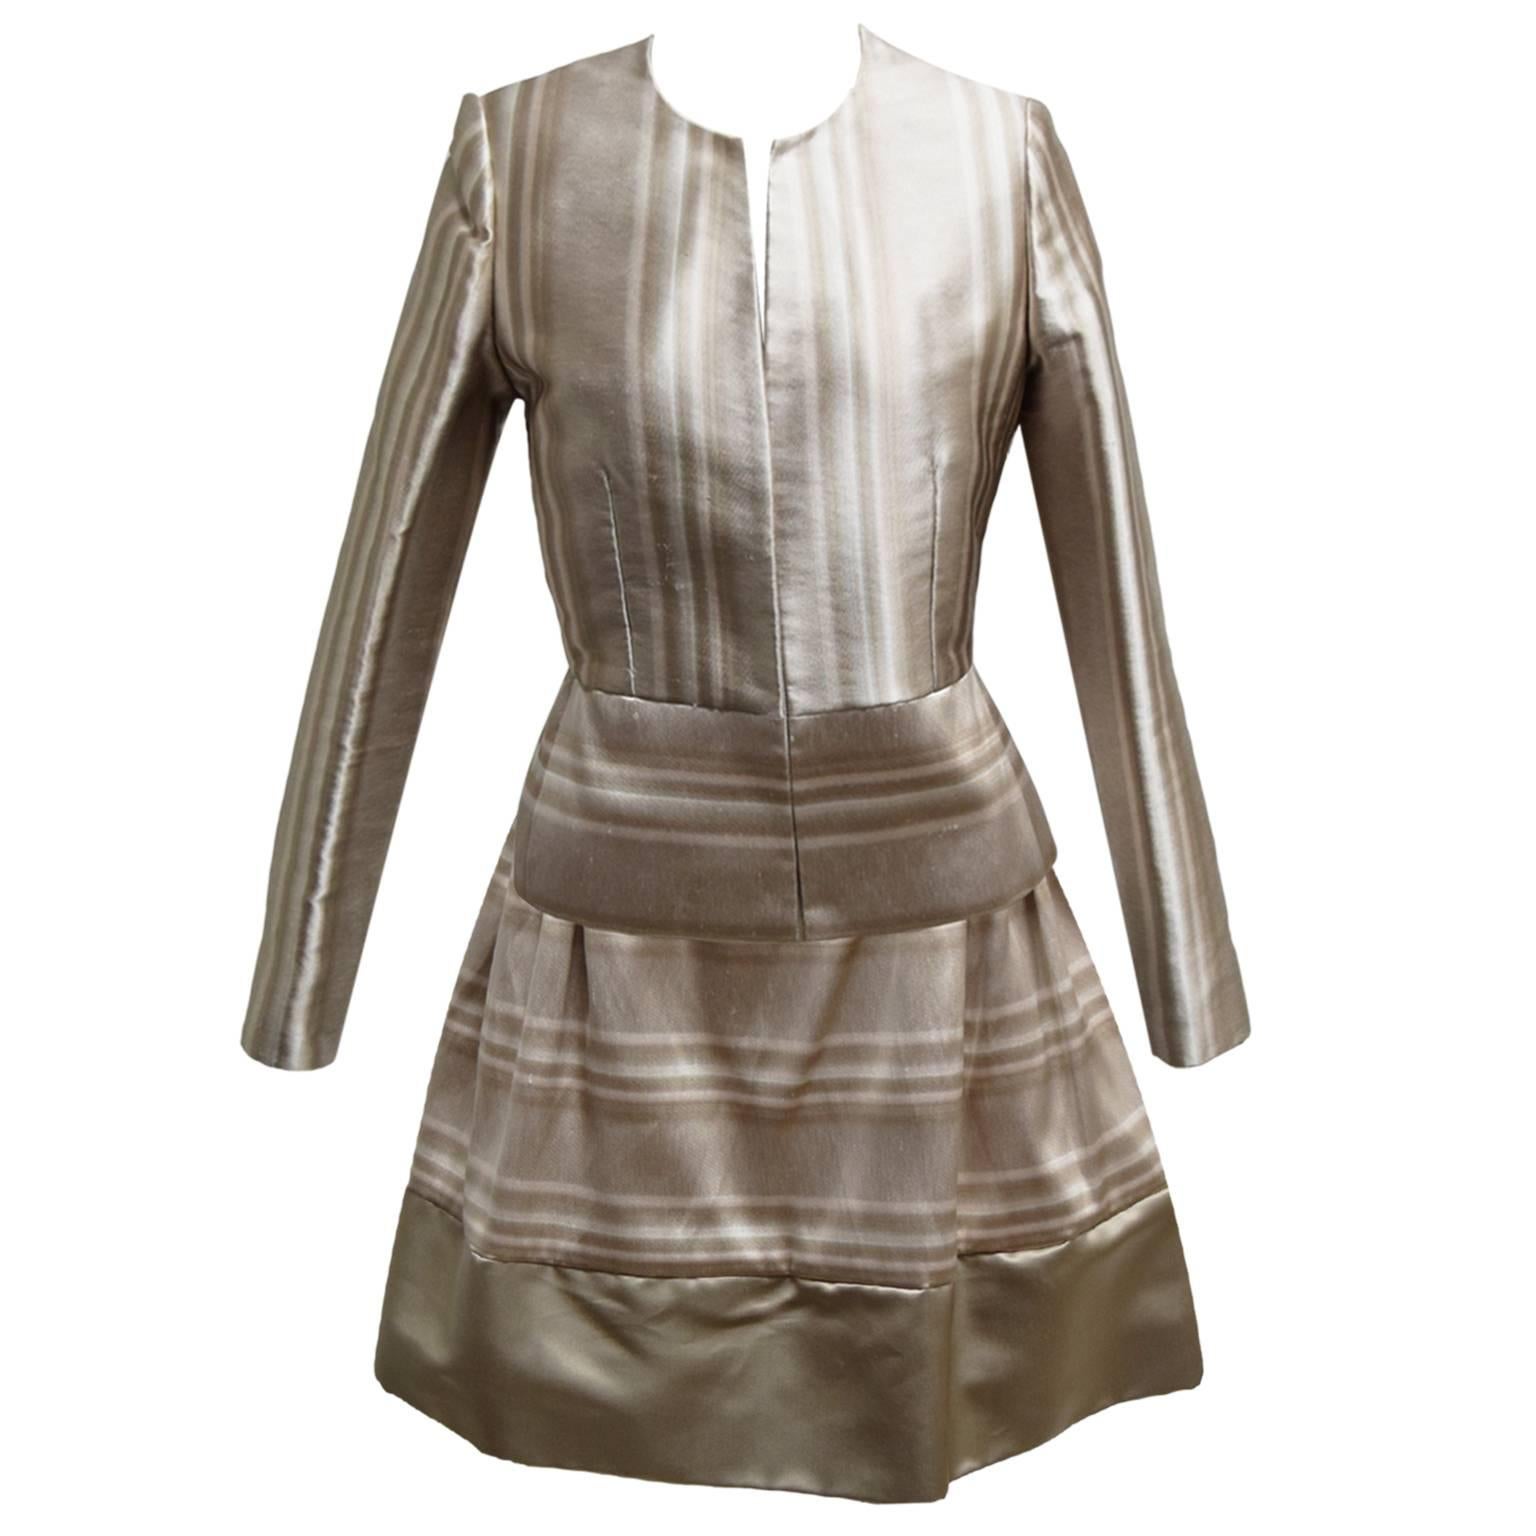 Bill Blass Satin Abstract Striped Beige Two Piece Skirt Ensemble For Sale